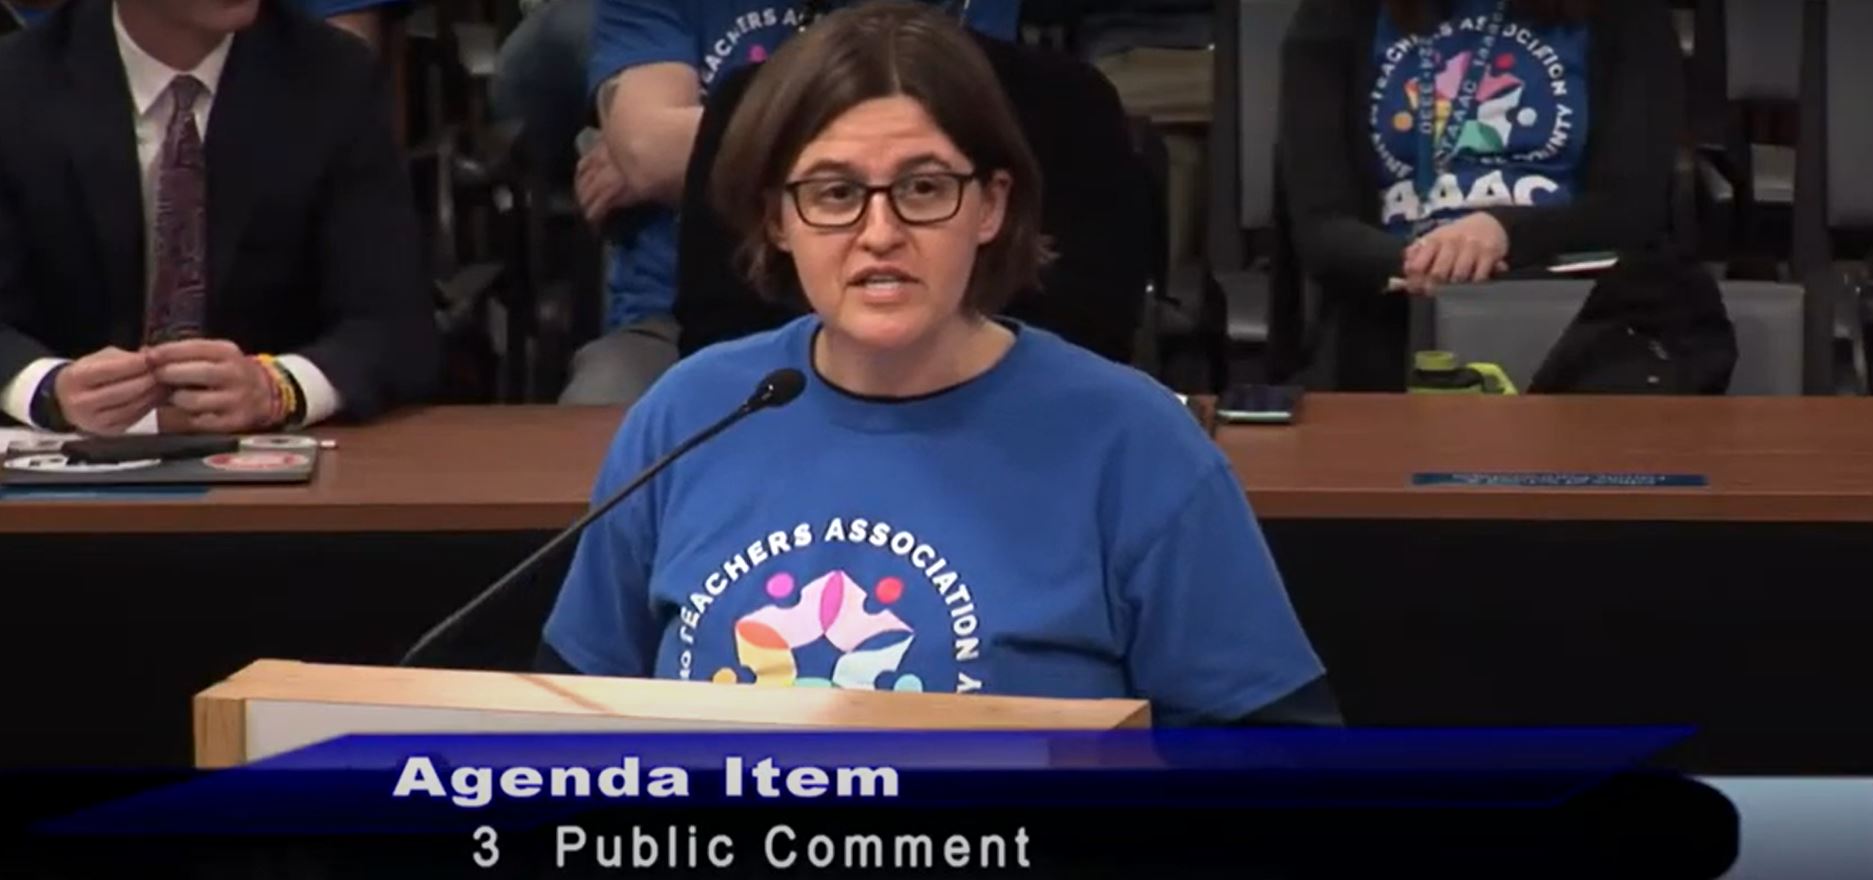 Kristina Korona speaking at the Board of Education hearing on the importance of planning time, capping non-professional duties, and extending pay for sub coverage.